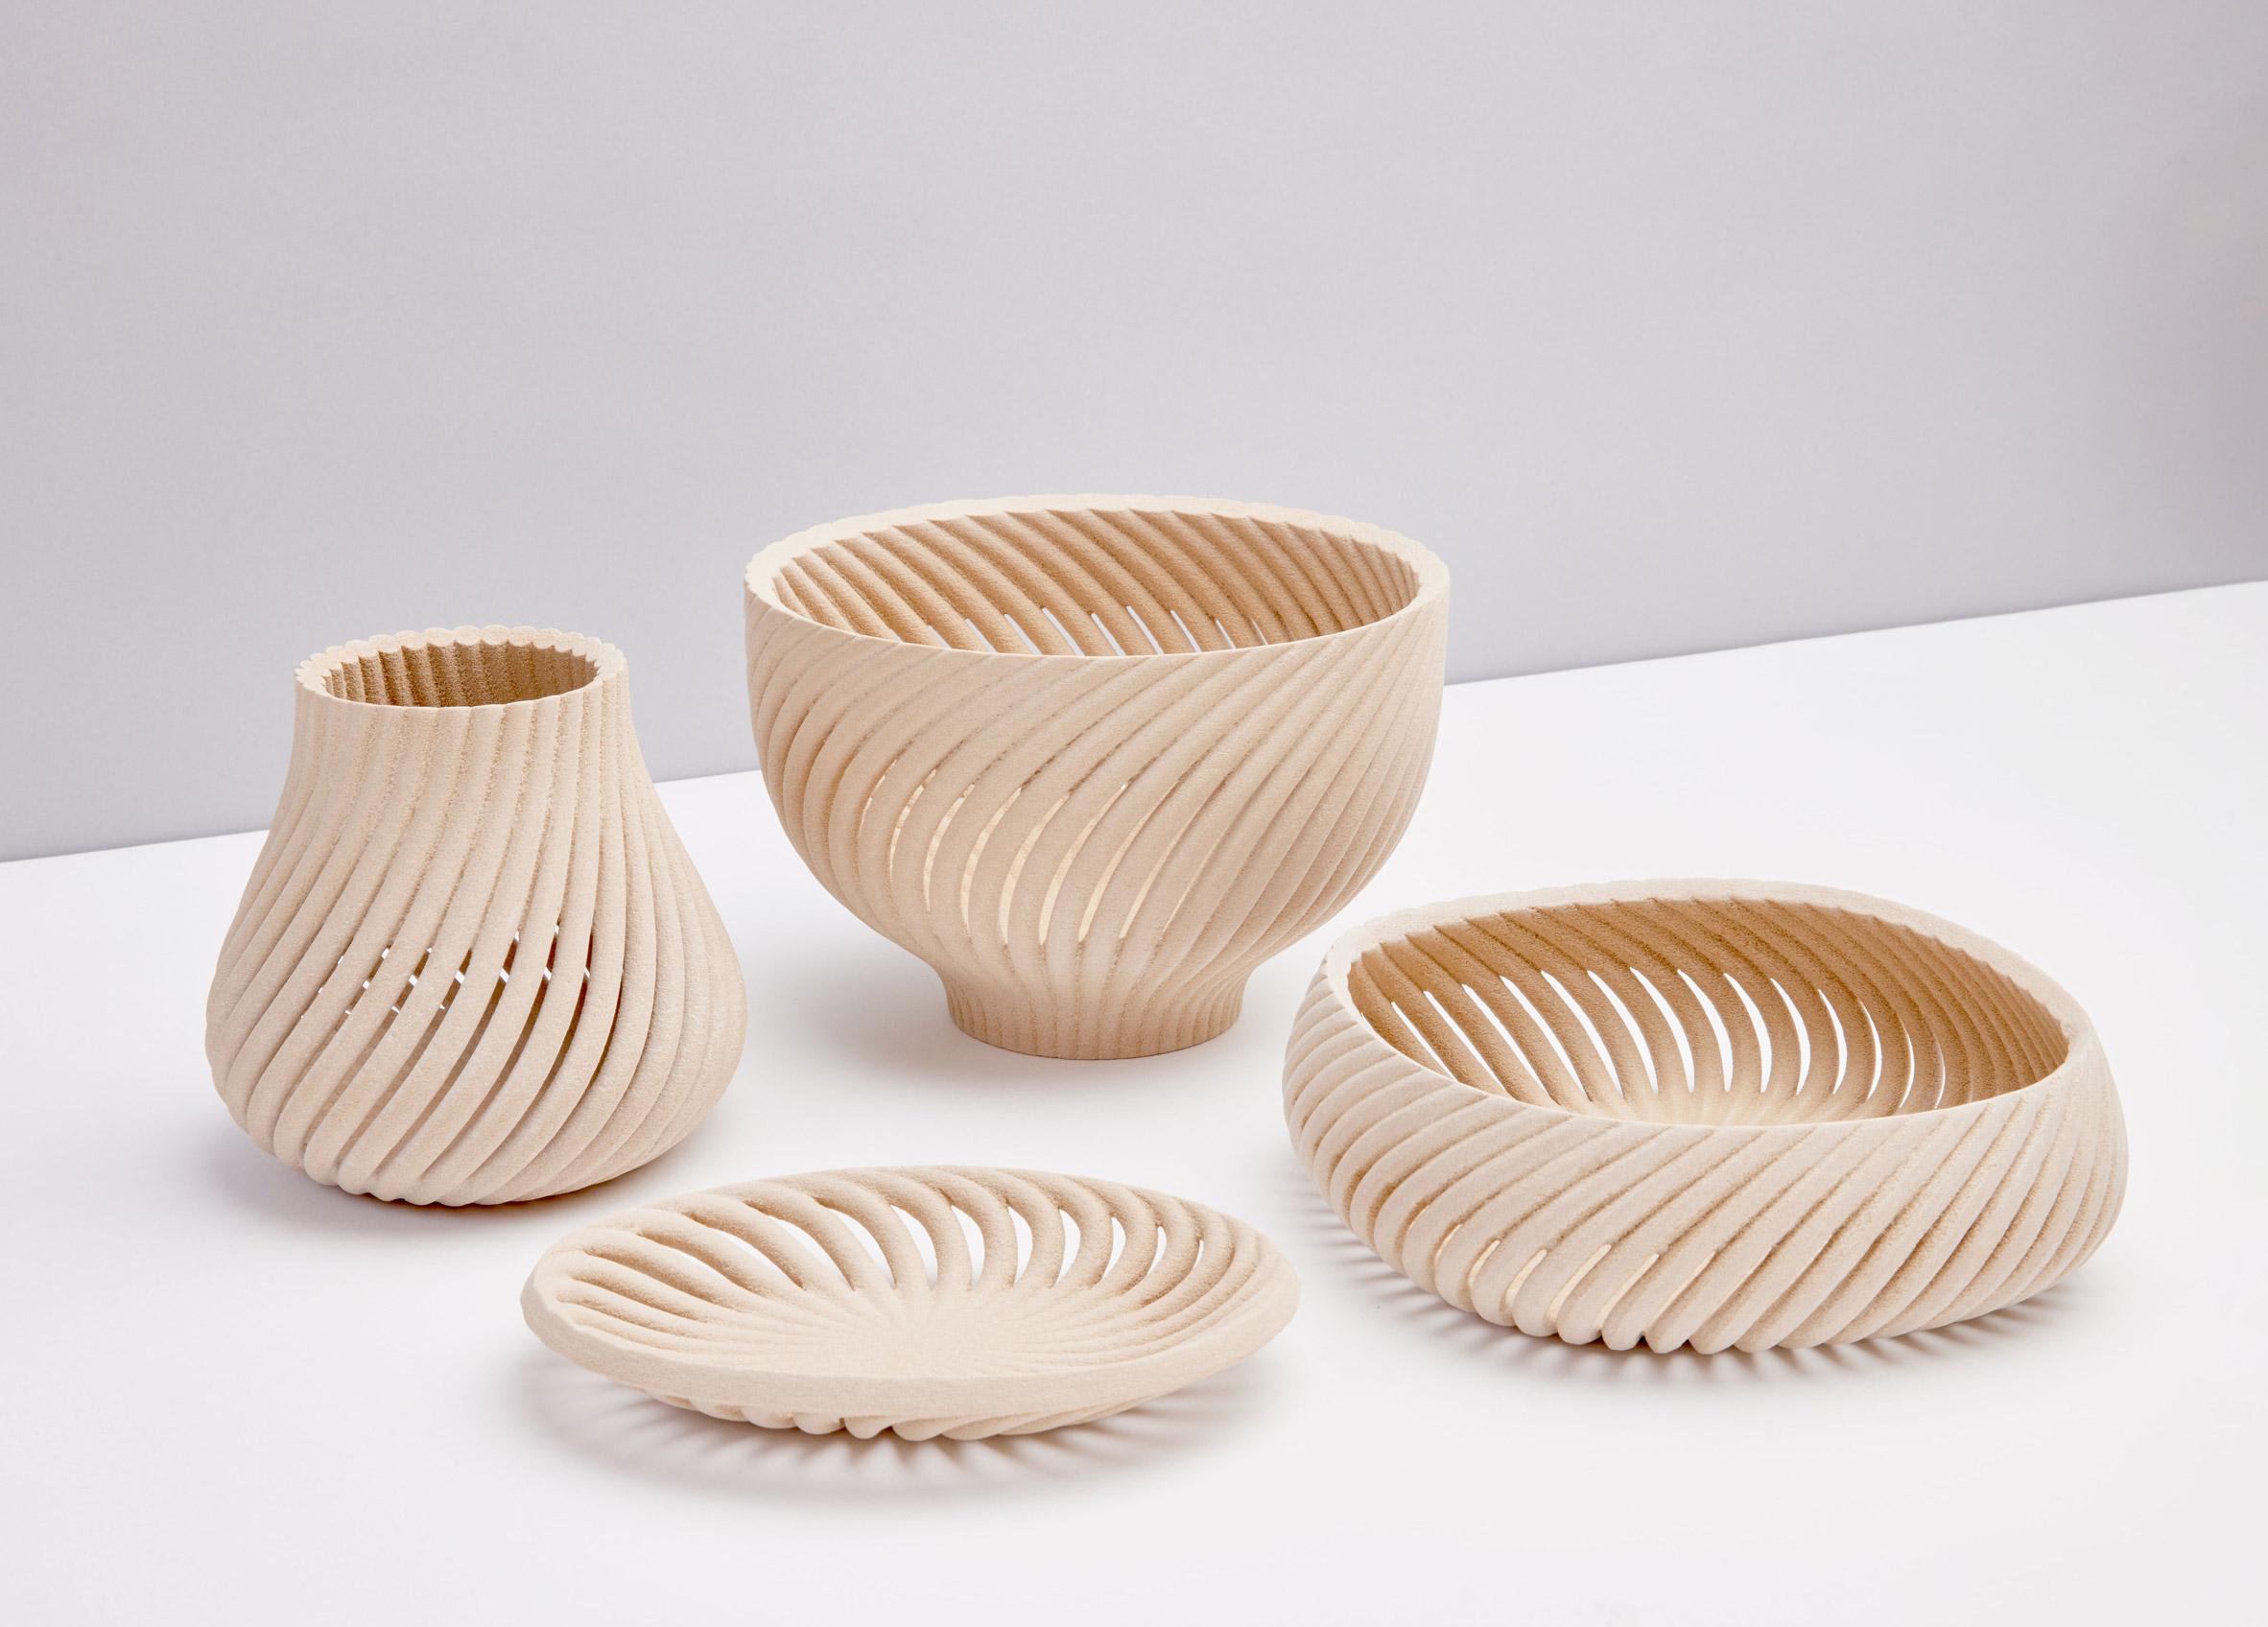 Homeware collection by Yves Behar made from 3D printed wood waste